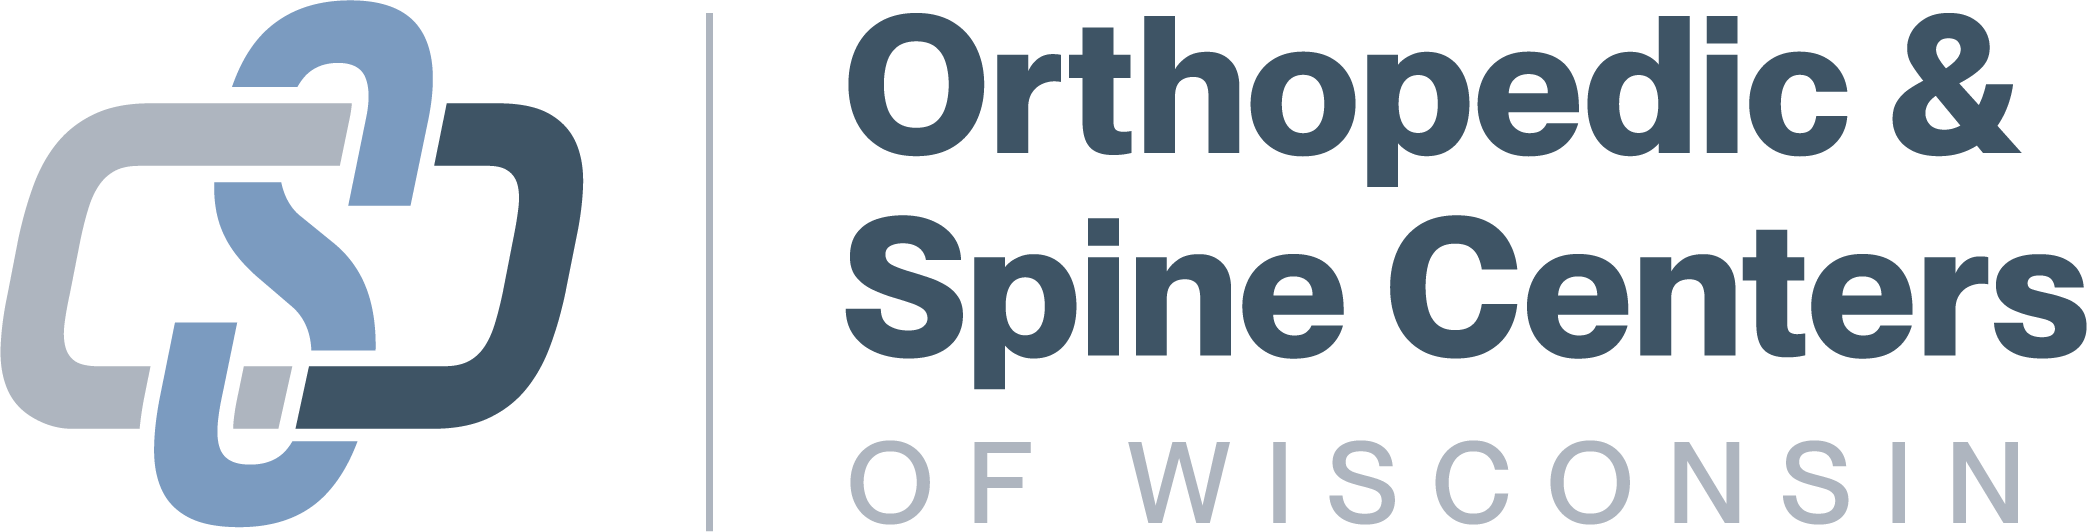 Orthopedic Spine Centers of Wisconsin